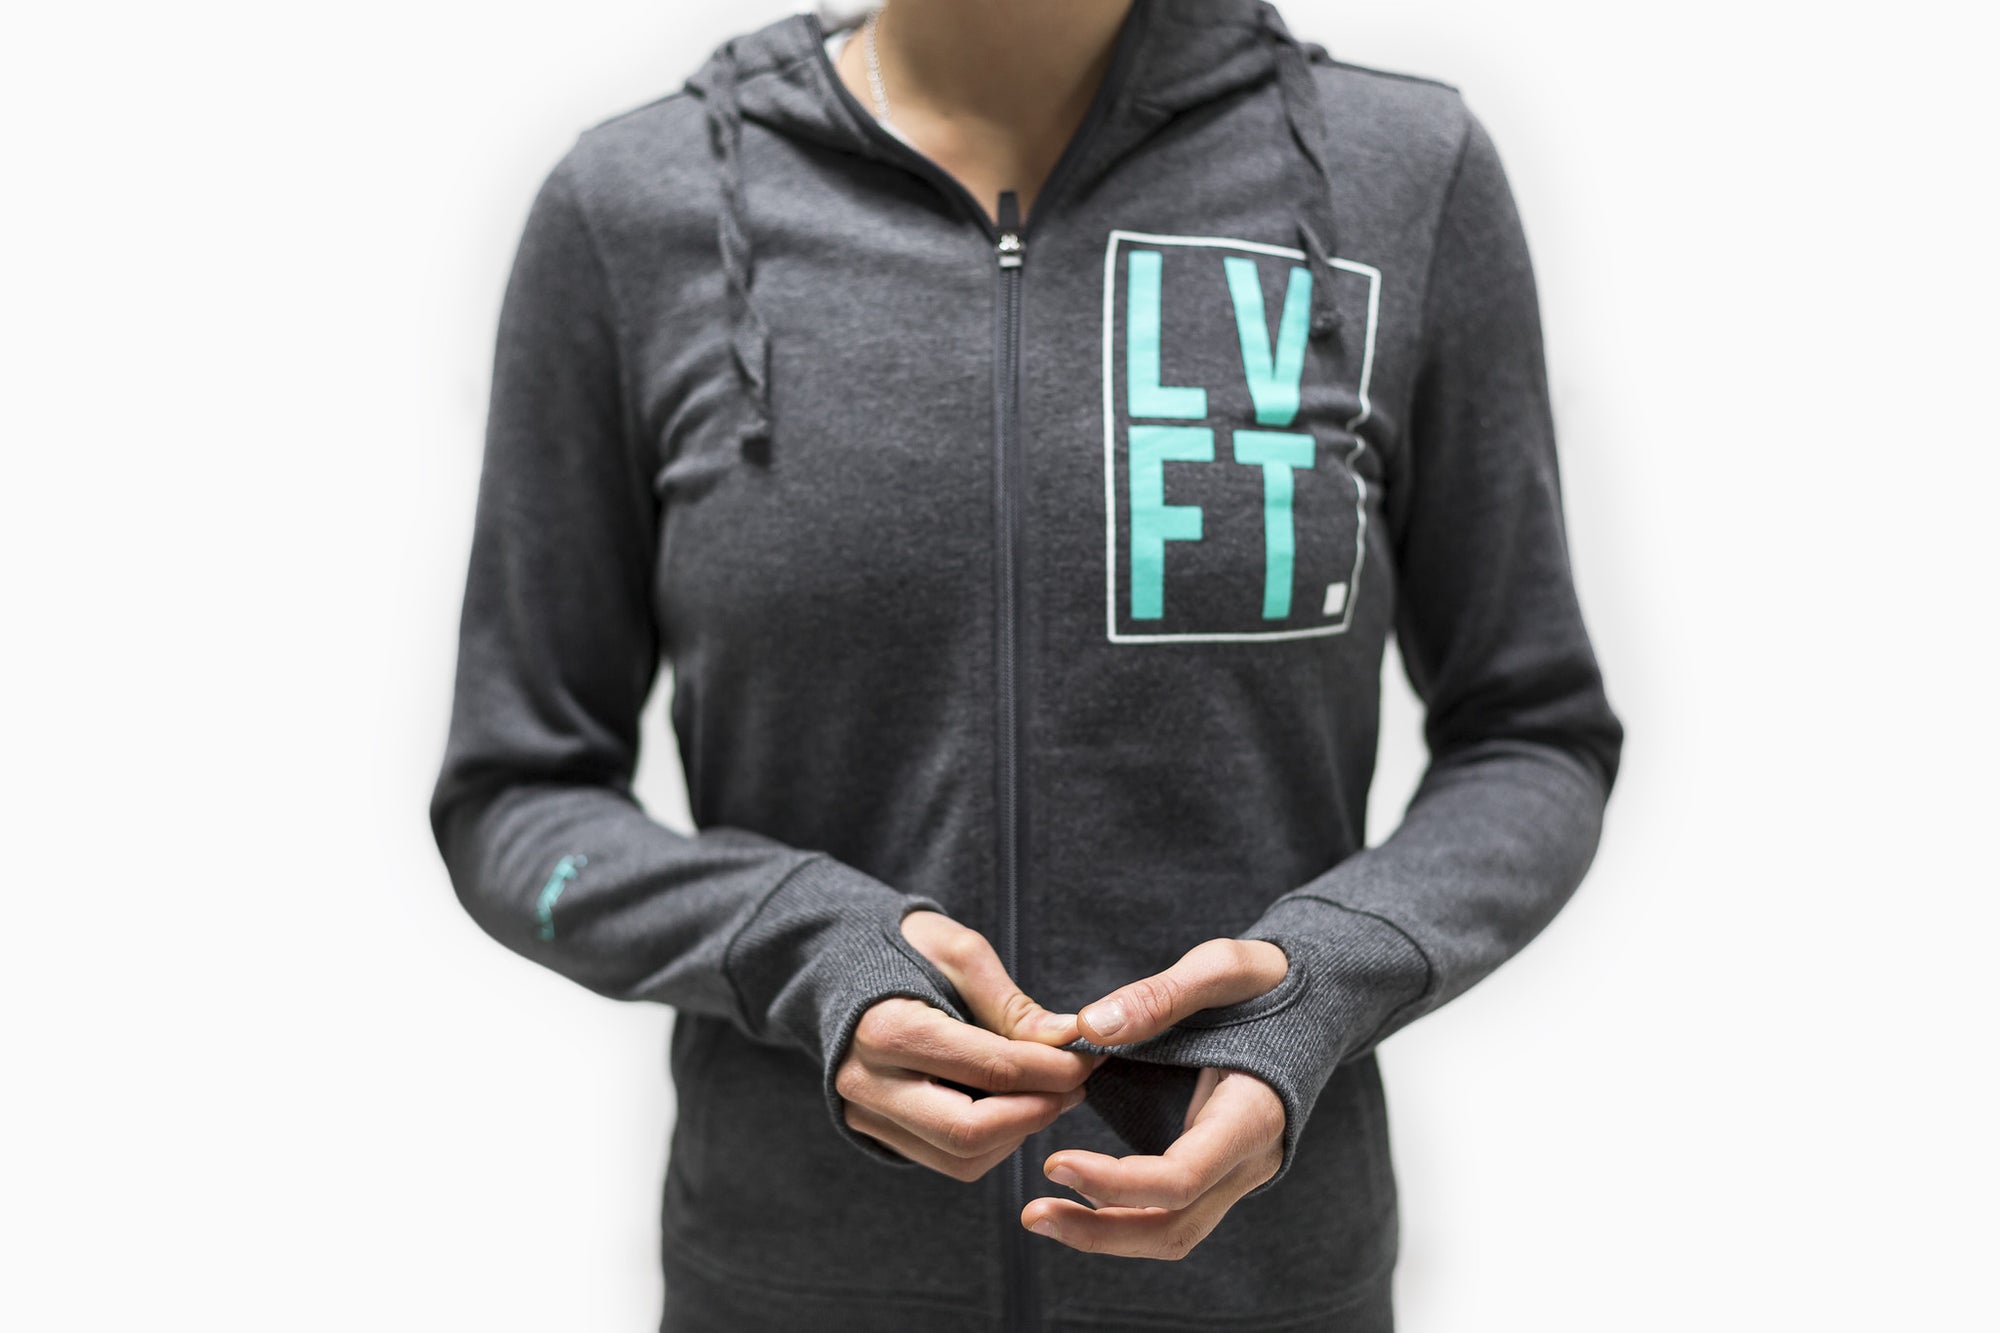 Women's Stacked Zip Up - Charcoal - Live Fit. Apparel